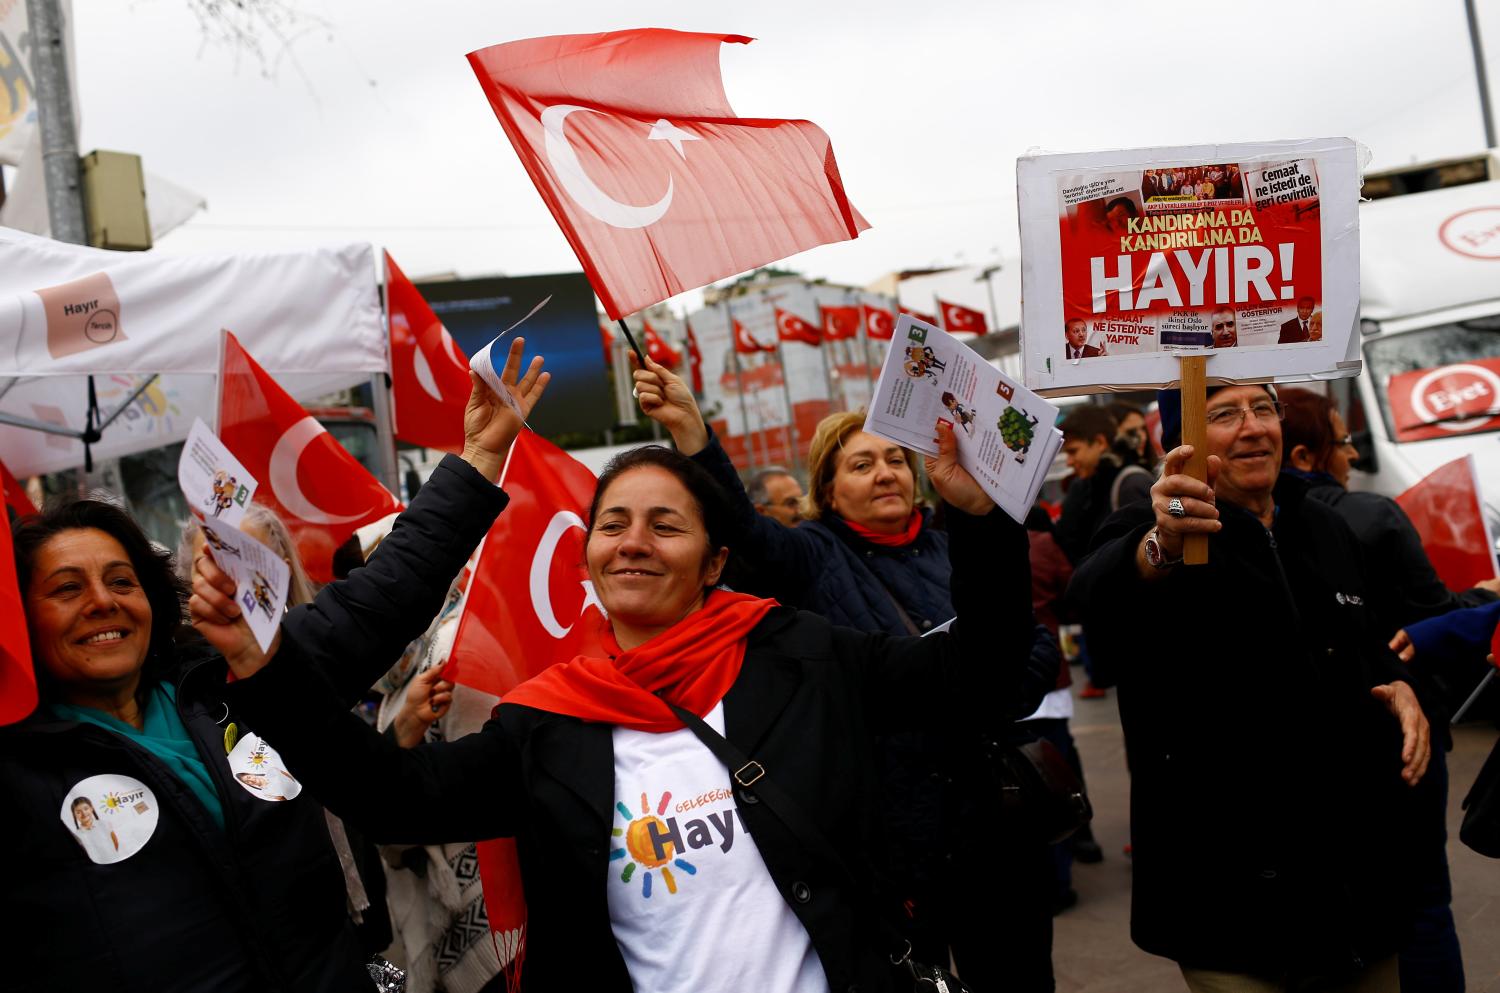 "Hayir", "No" in English, supporters hold Turkish flags and leaflets for the upcoming referendum at a campaign point in Istanbul, Turkey, March 31, 2017. Picture taken March 31, 2017. REUTERS/Murad Sezer - RTX354XR